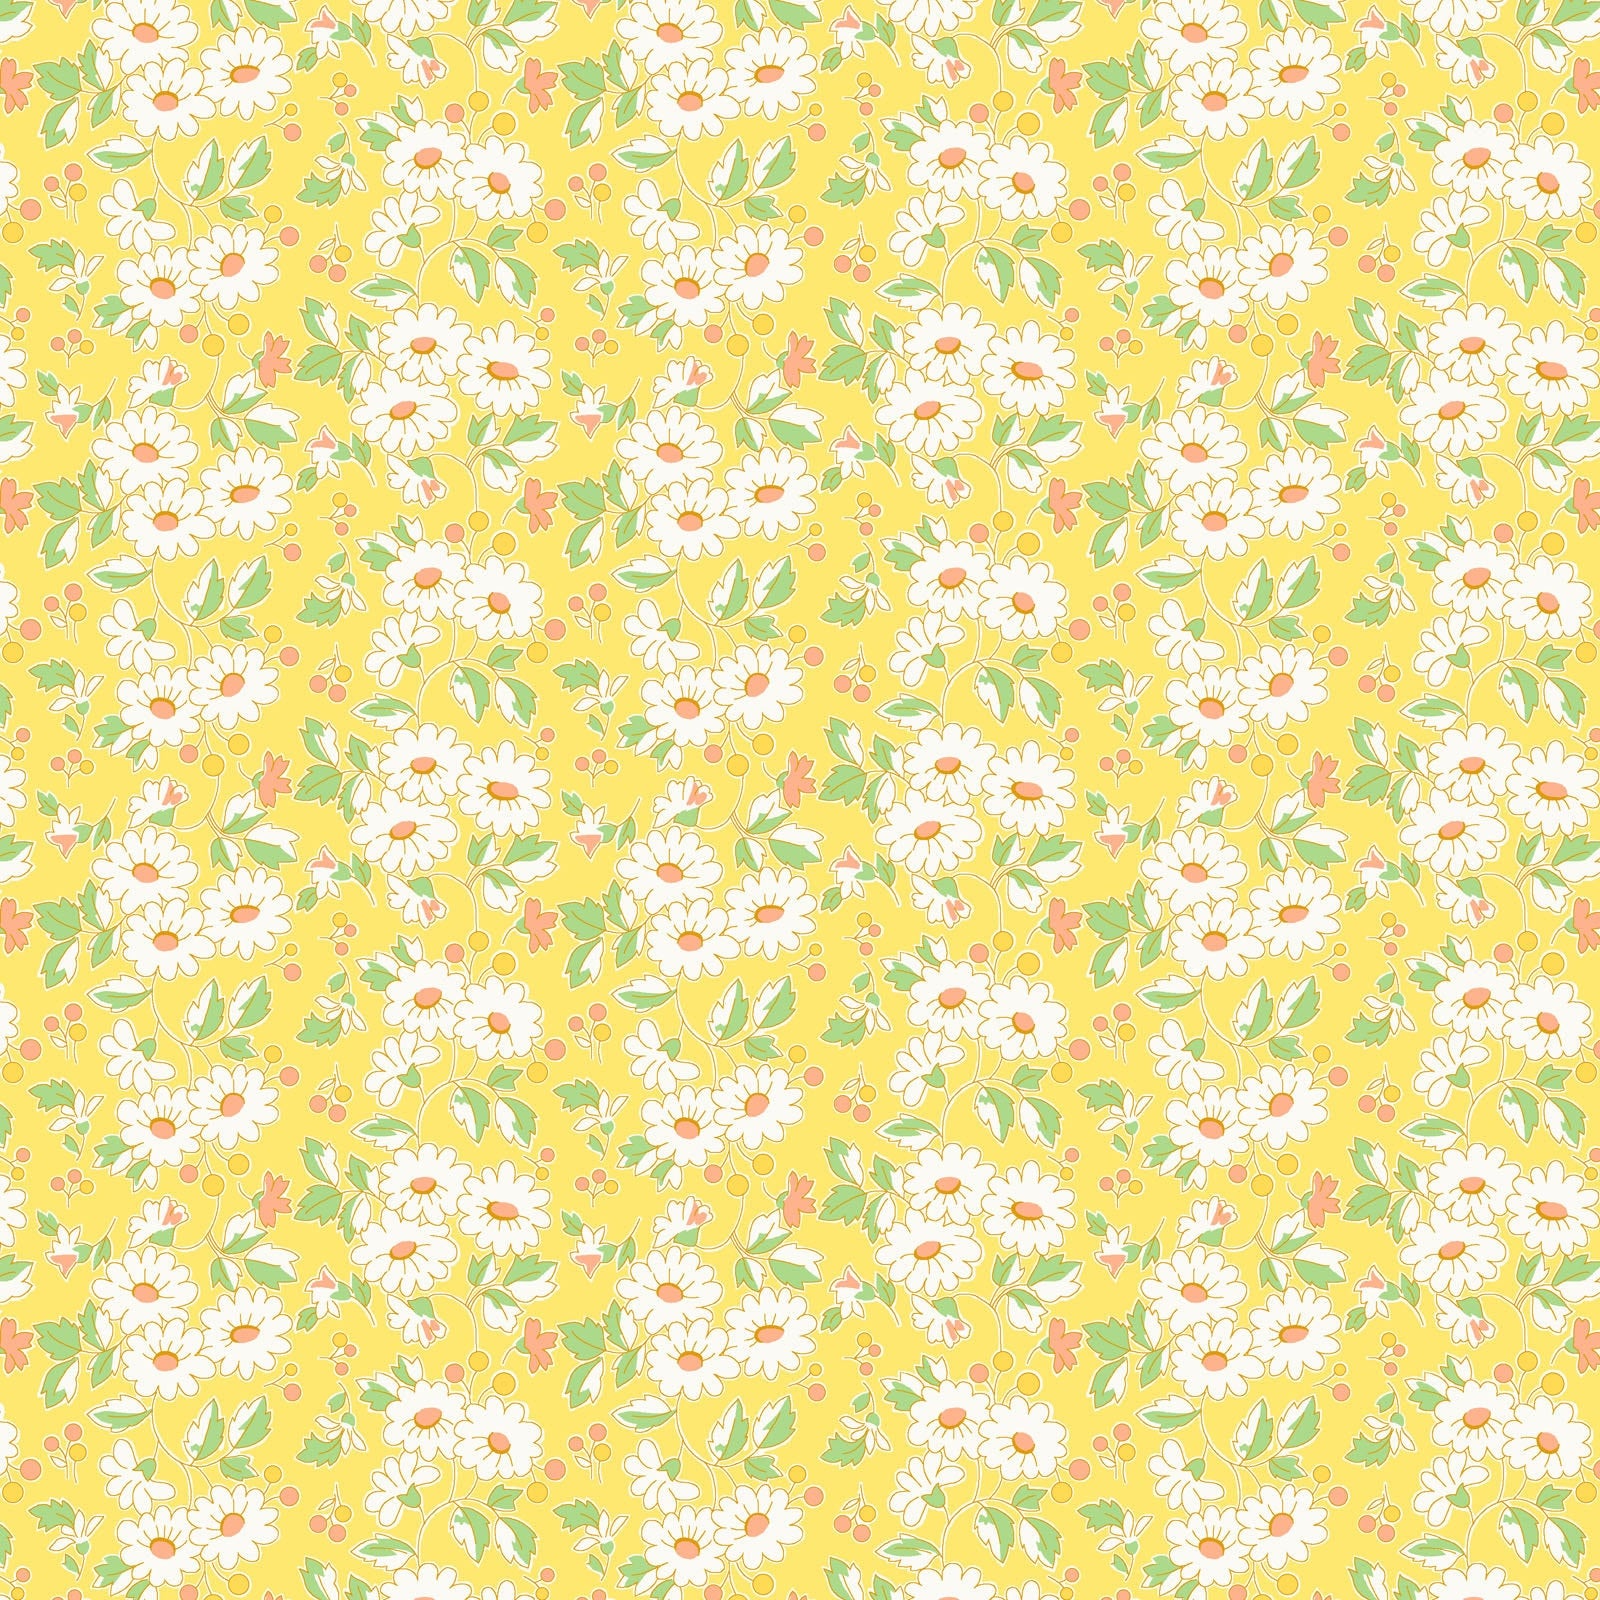 Nana Mae's Flower Clusters 3 yard quilt kit. One yard of each of 3 coordinating fabrics perfect for a quick and easy quilt.